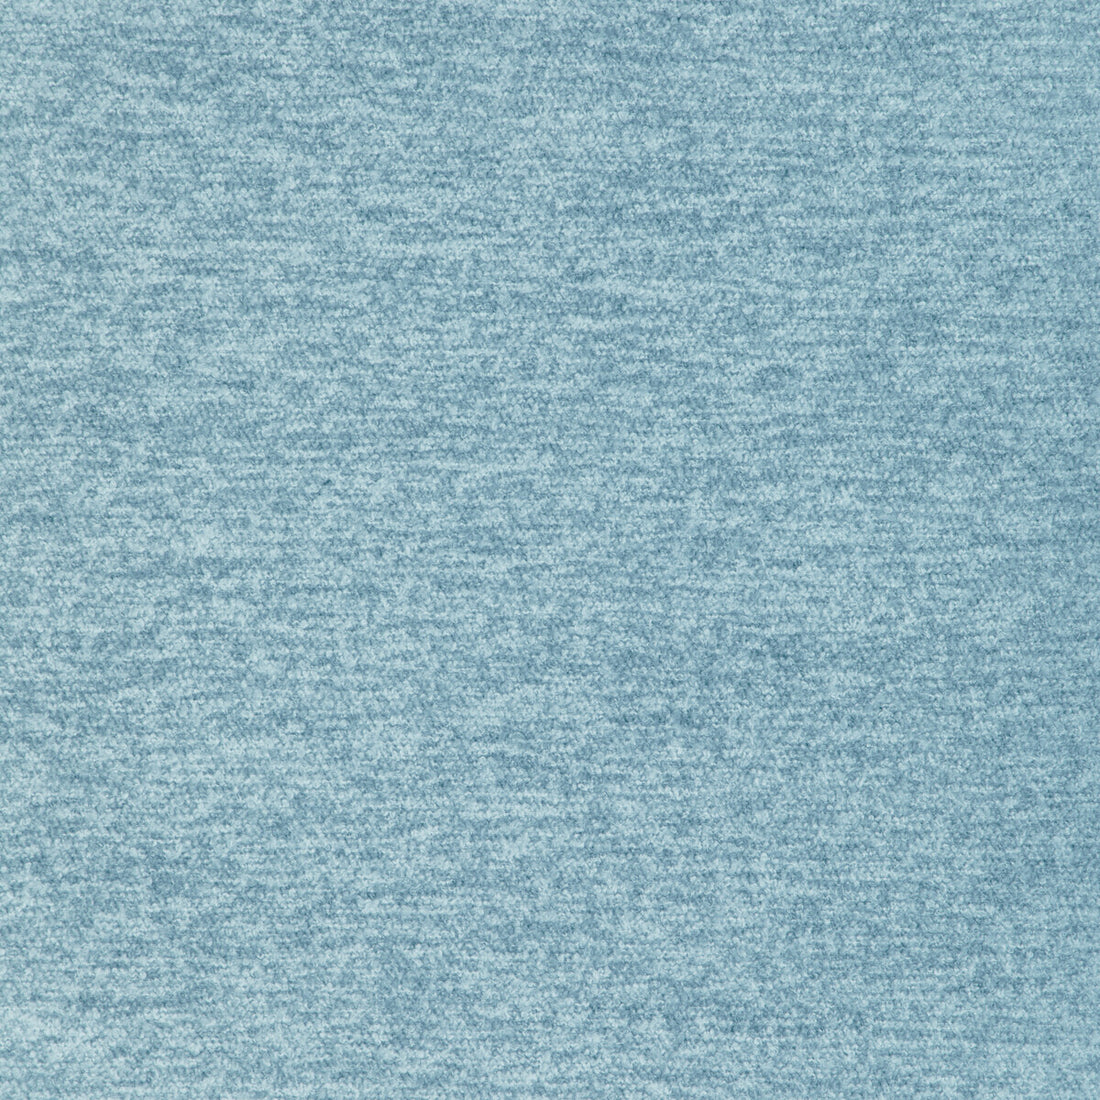 Rohe Boucle fabric in ocean color - pattern 36952.515.0 - by Kravet Basics in the Mid-Century Modern collection